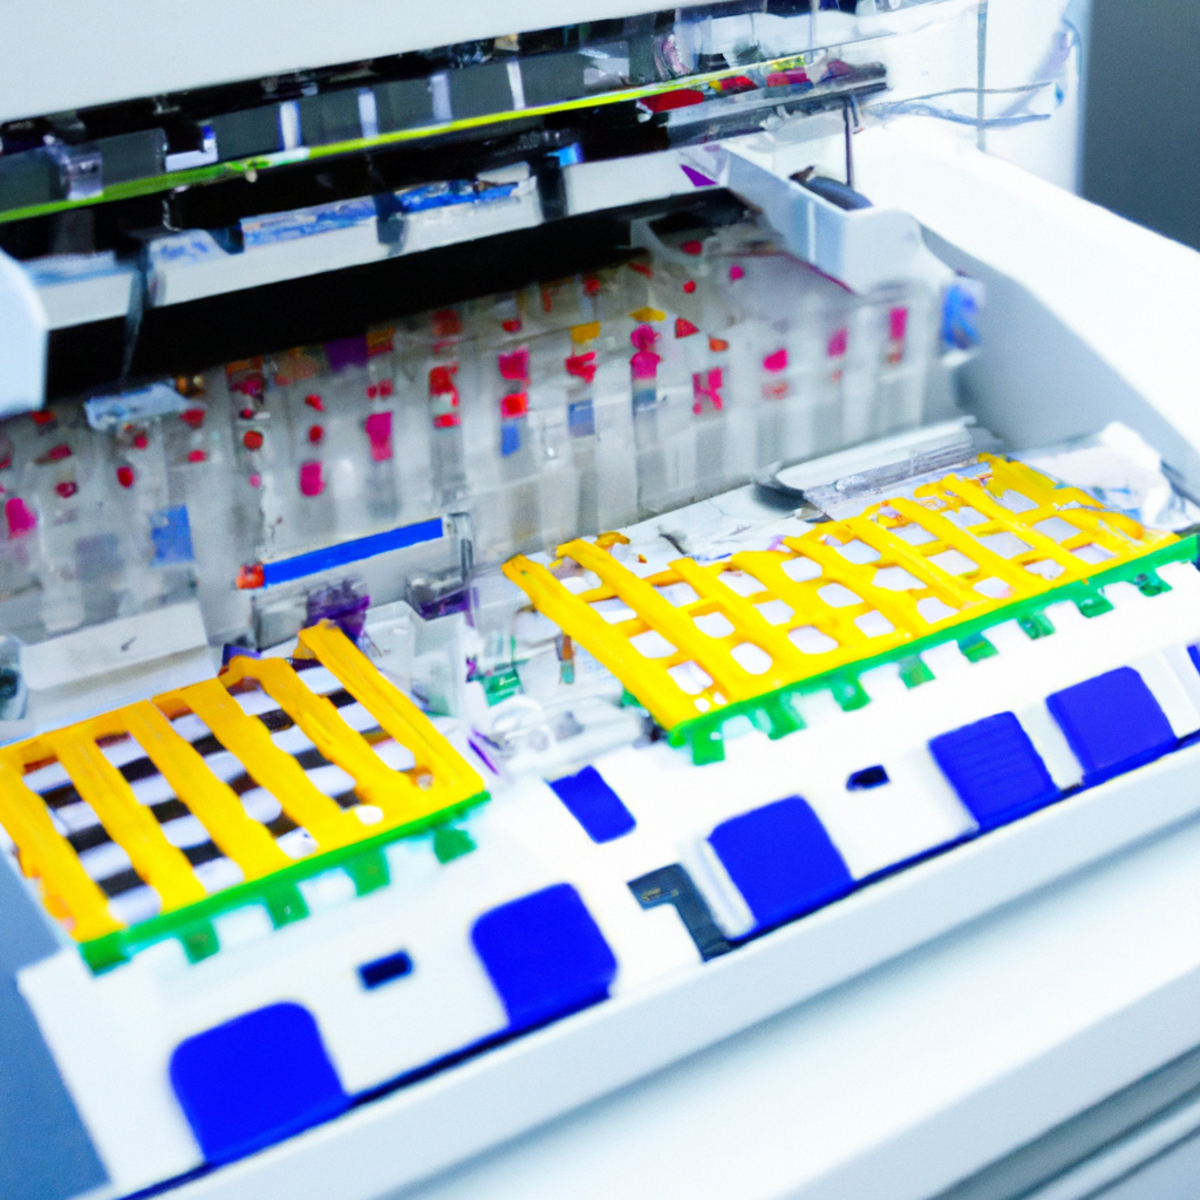 Close-up of state-of-the-art genetic sequencing machine in a sleek design, surrounded by labeled test tubes and vials - Hemochromatosis